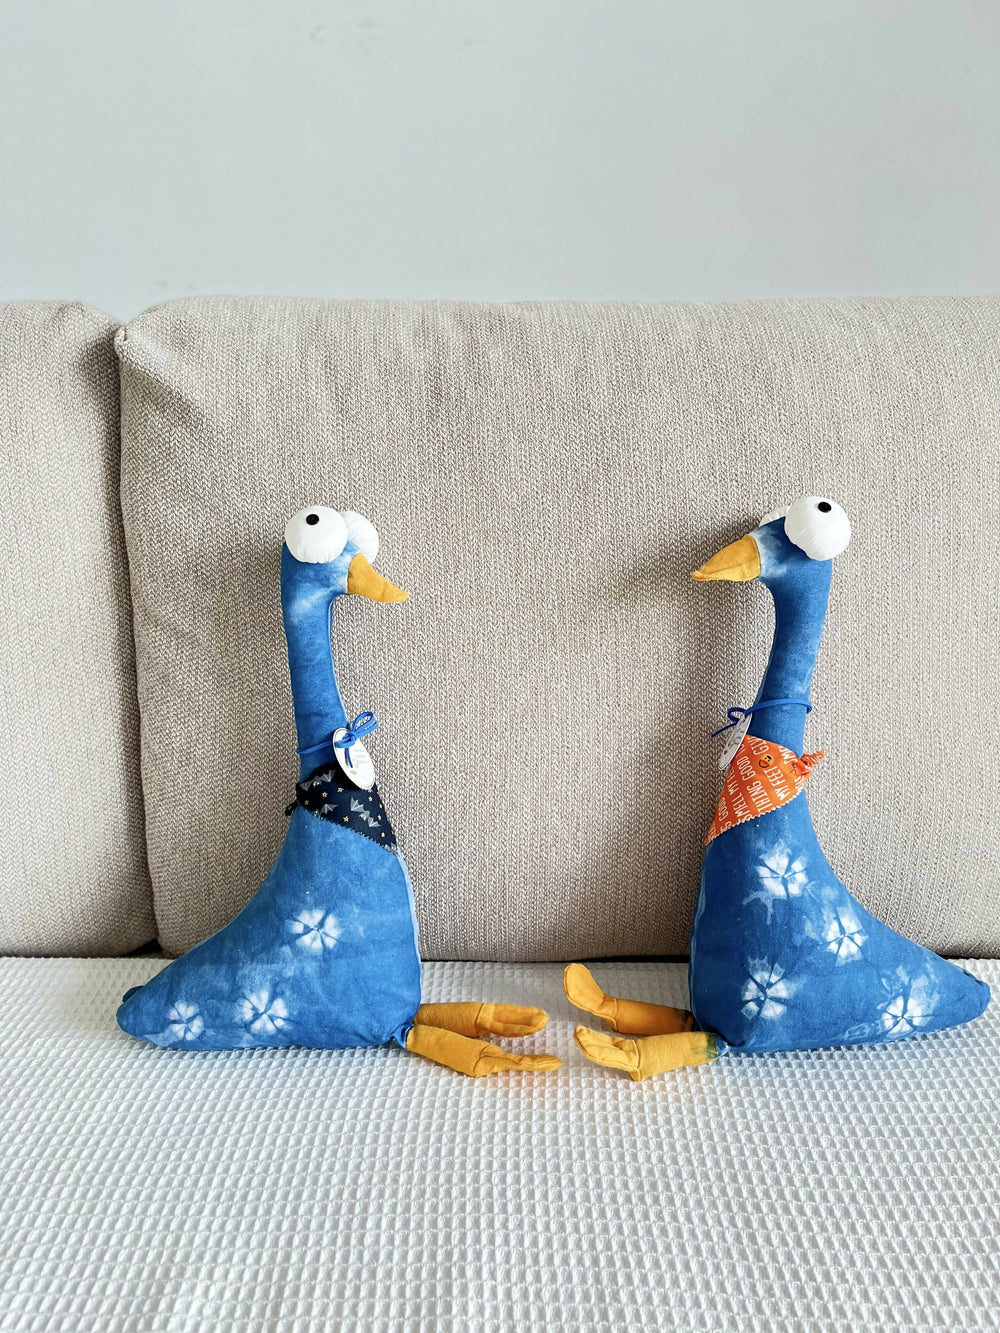 Natural indigo dye shocked duck dolls with floral scarf / cute stuffed soft duck toy / funny duck baby. An unique birthday / new born gift. Scarfs Blue Bee Tie Dye 